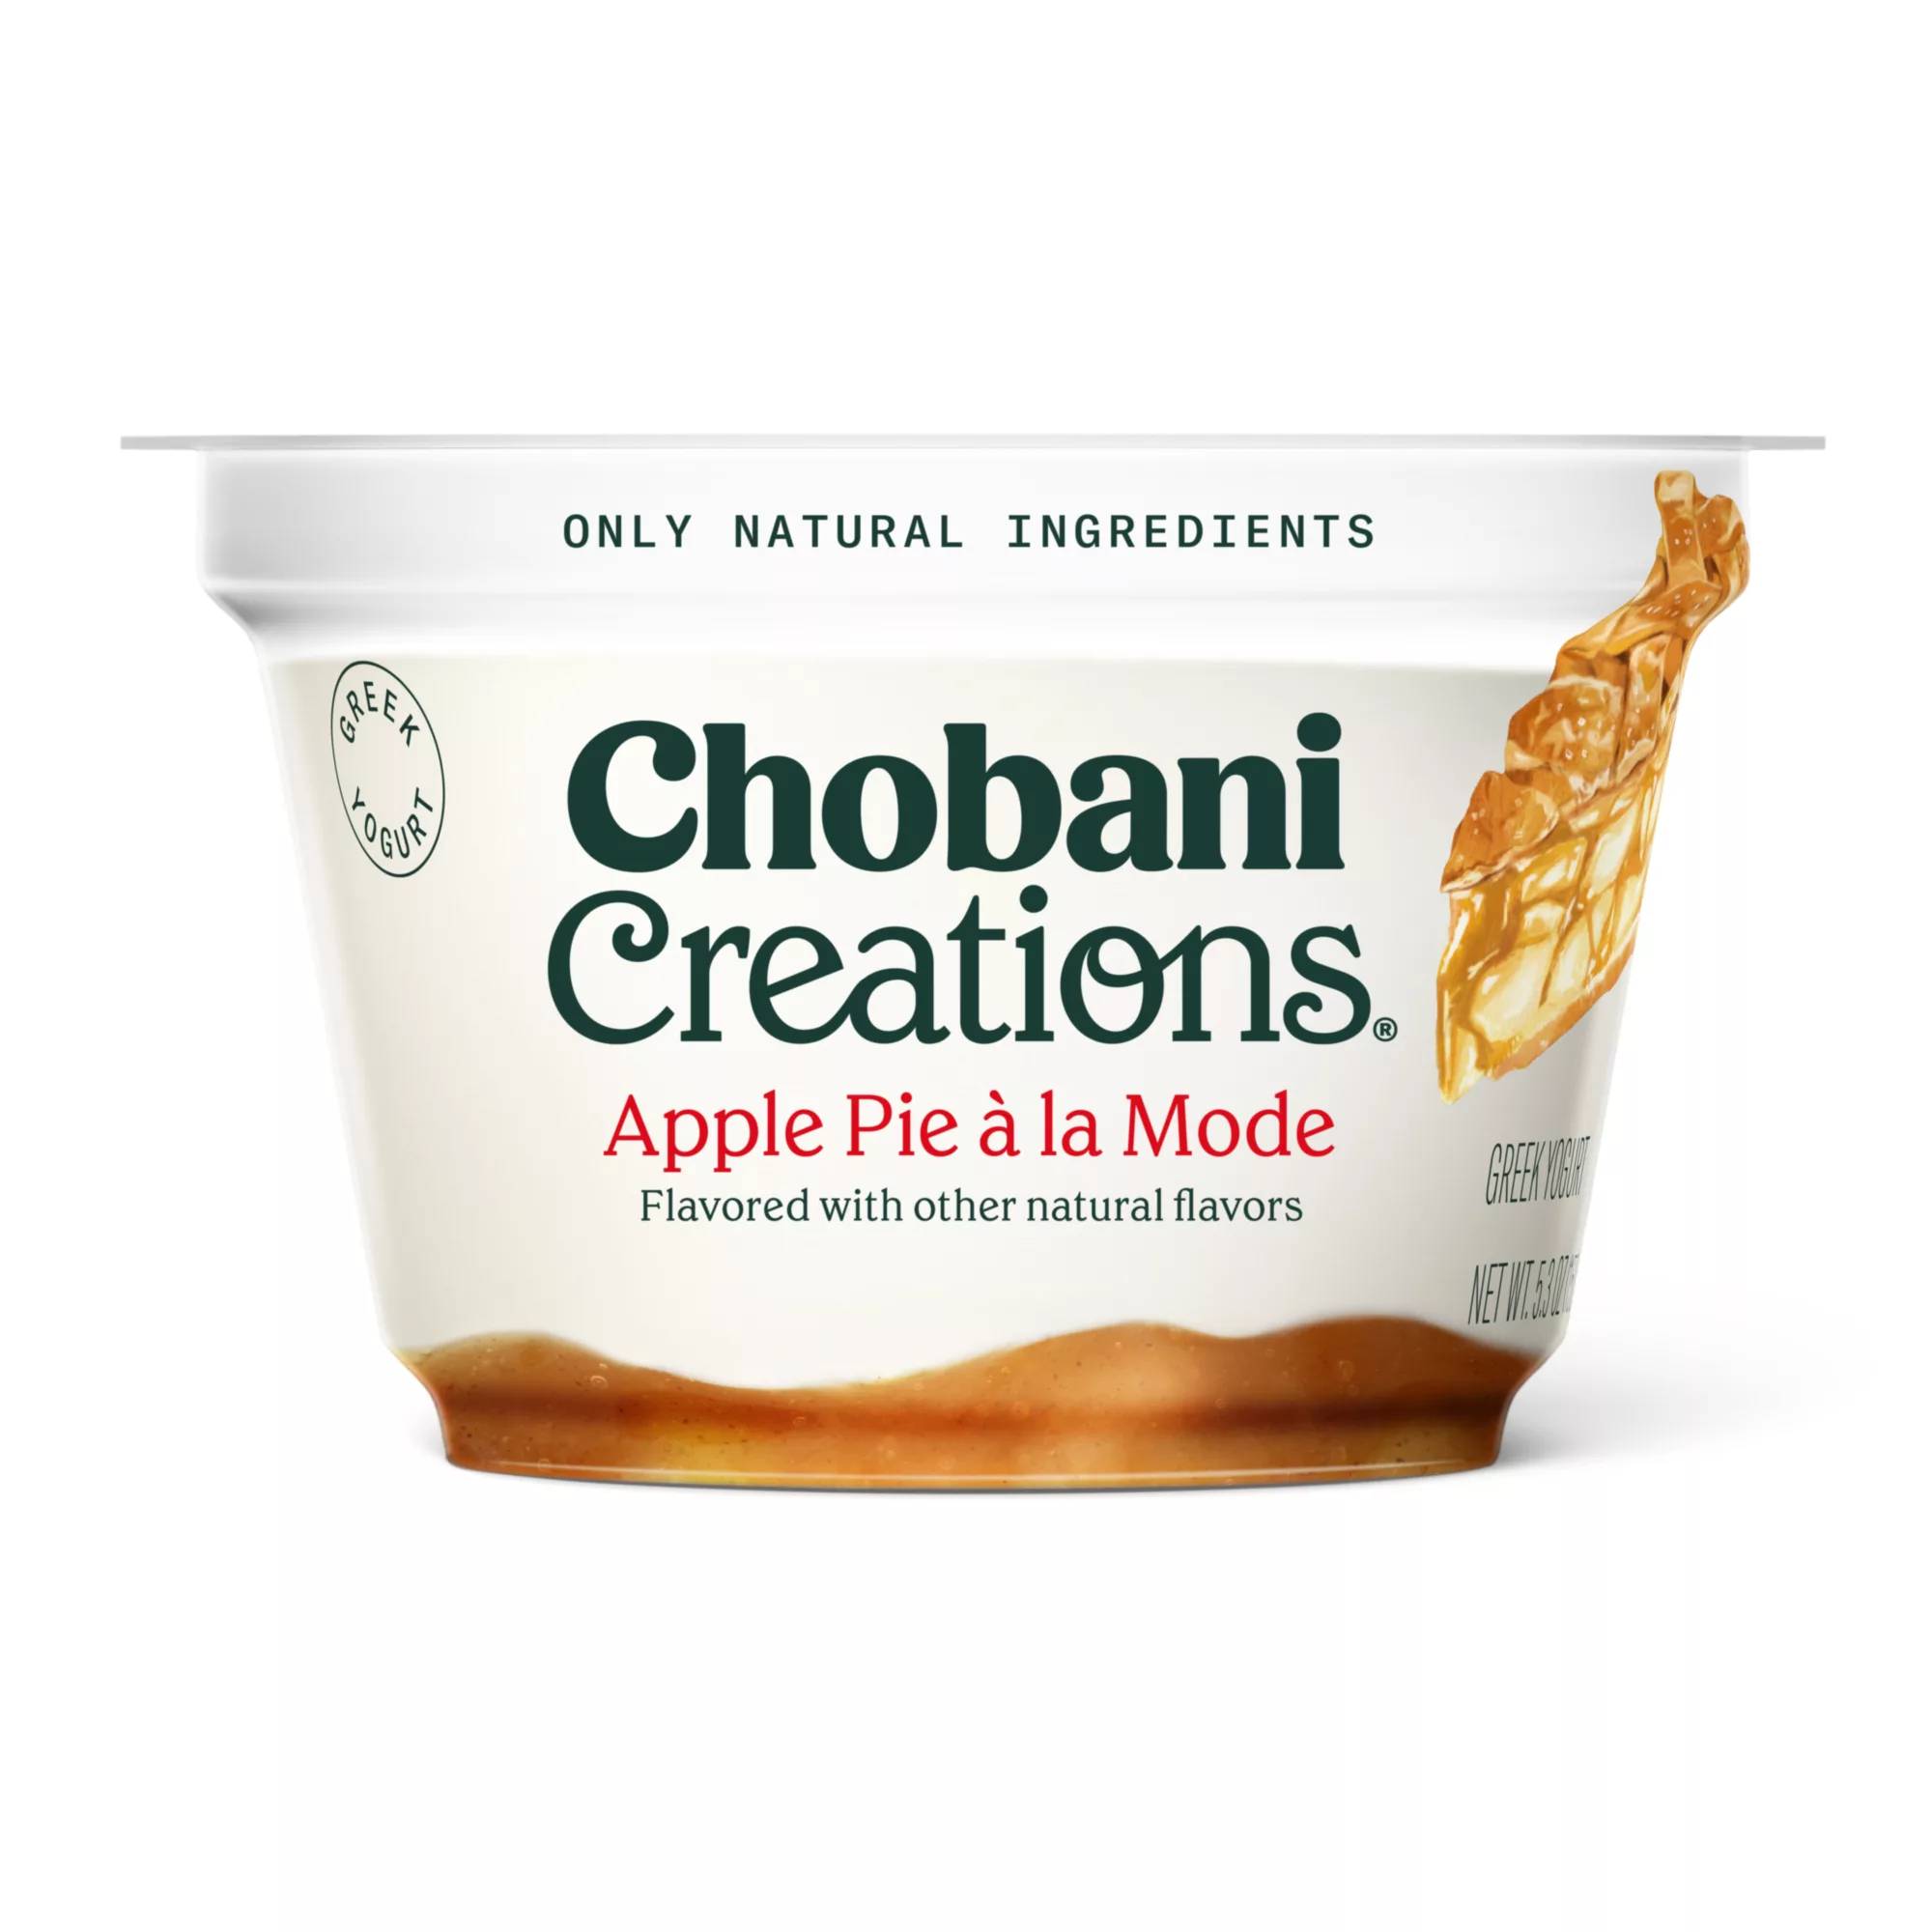 Dessert-inspired layers of rich, creamy Vanilla Whole Milk Blended Greek Yogurt and real apples.